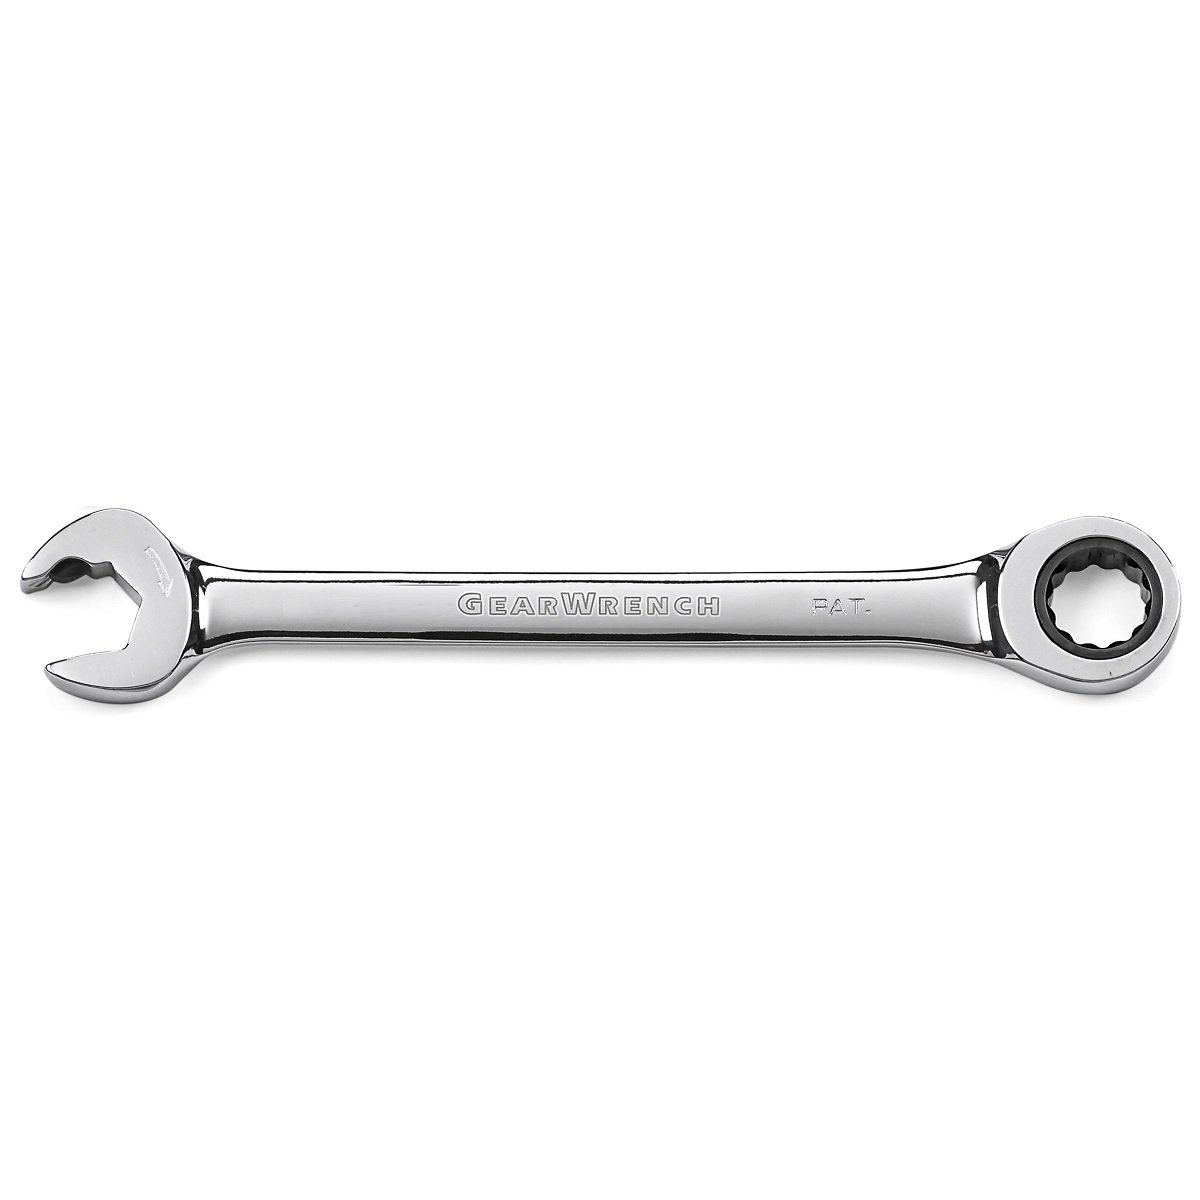 GearWrench Ratcheting Open End Combination Spanner Wrench 13mm 85513